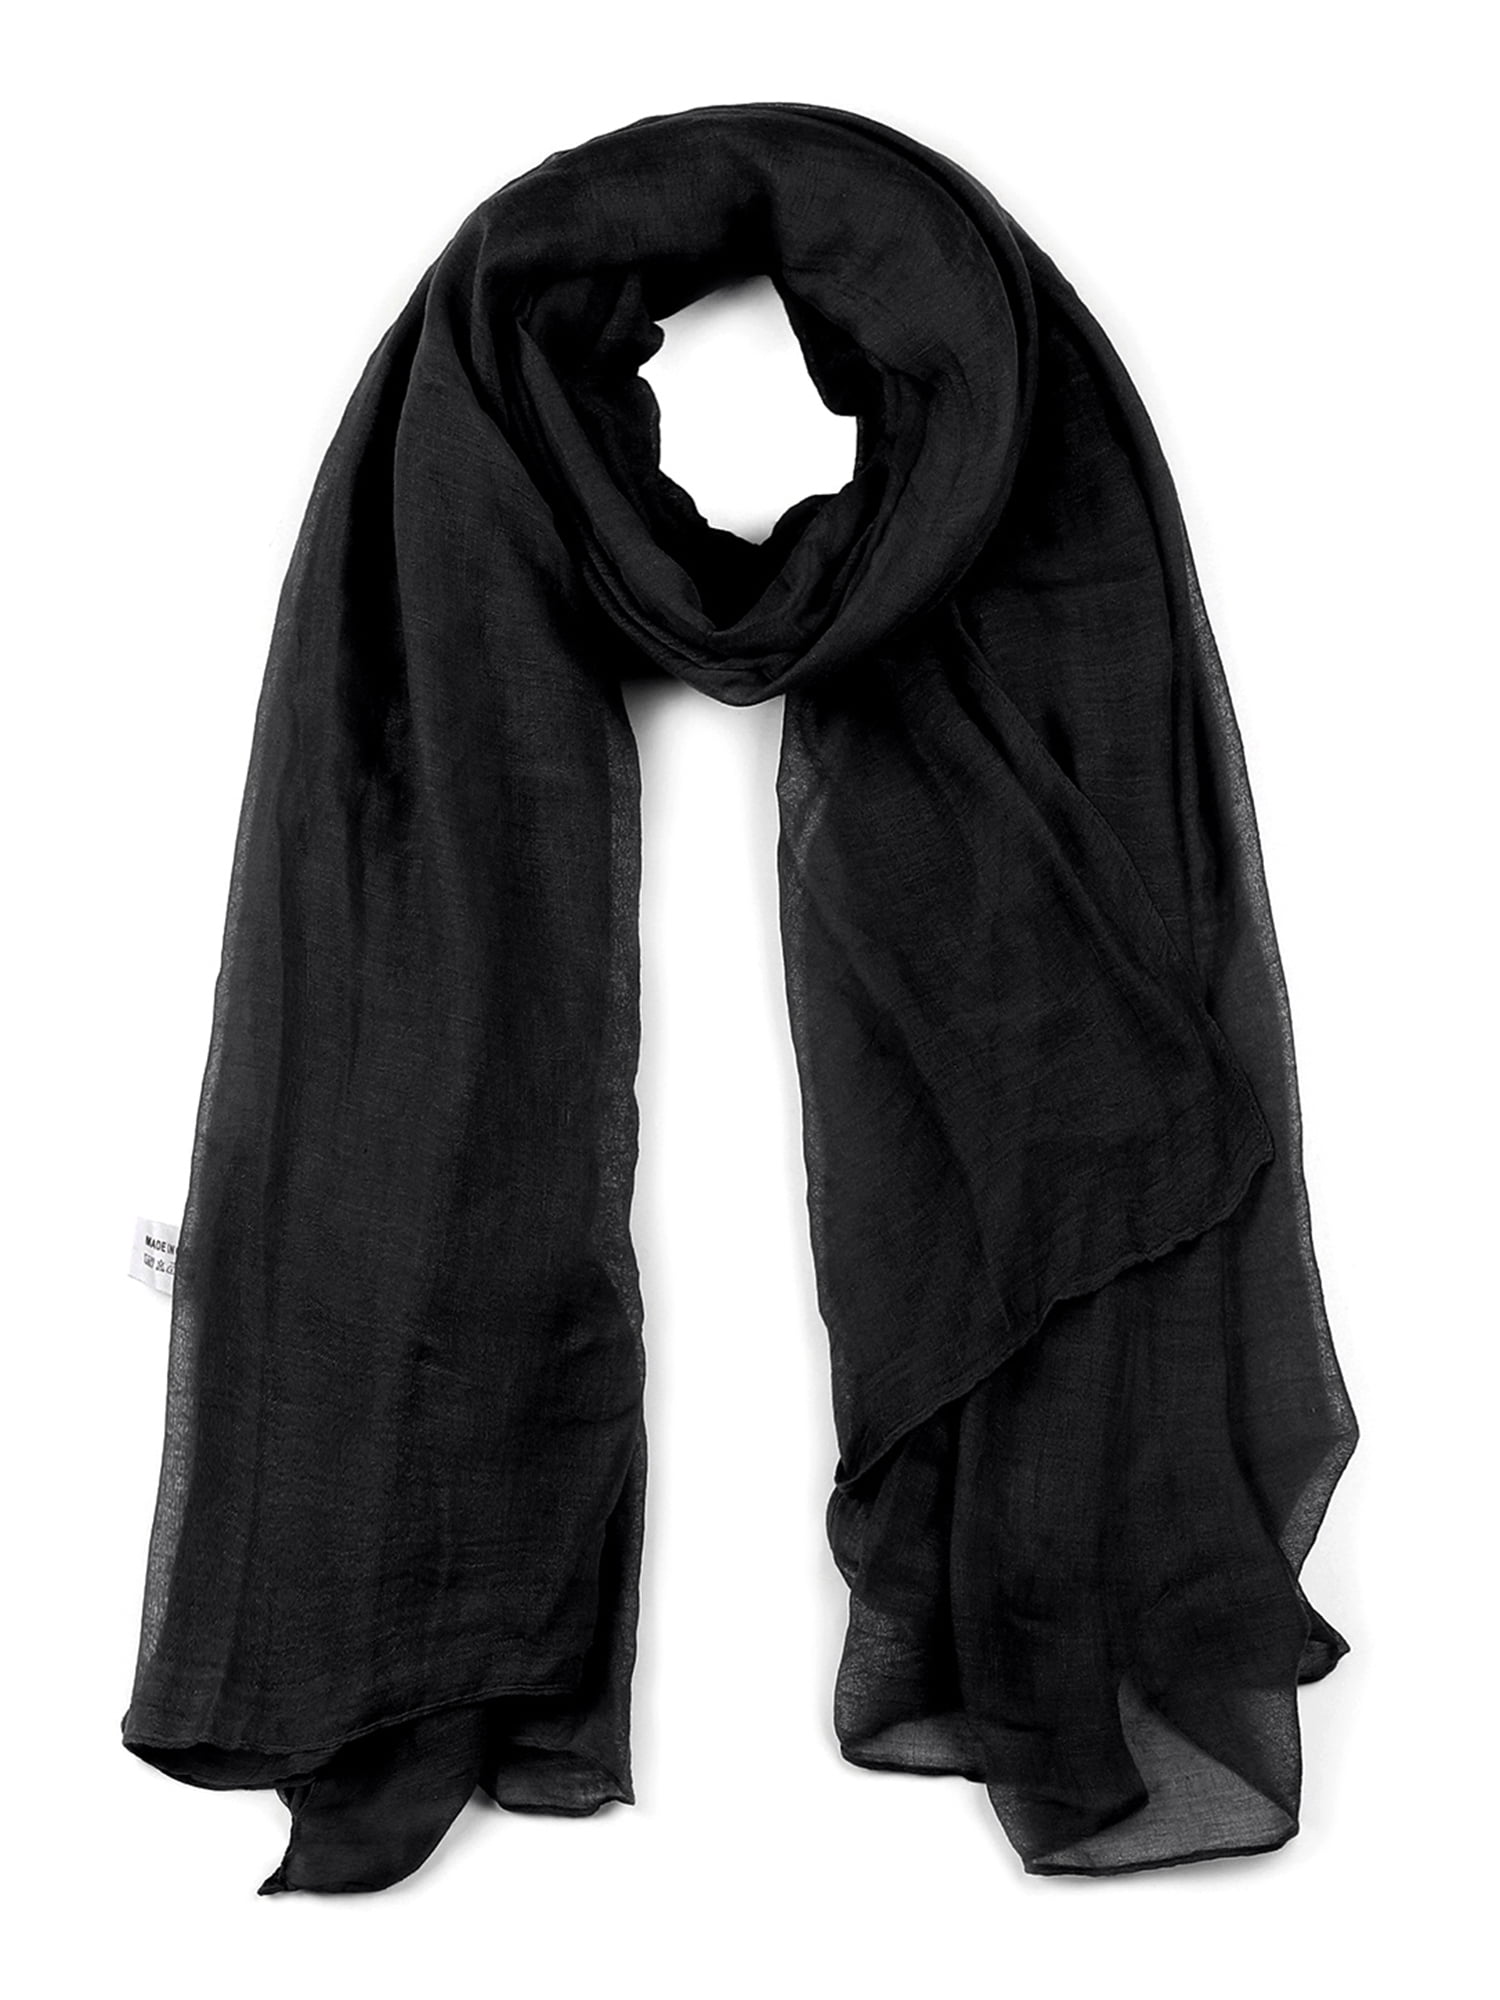 Black Color Cotton Wool Blend Scarf Dark Color Cotton Scarf for Gift Square Solid Scarf Best Gift for Her Soft Scarf for Women